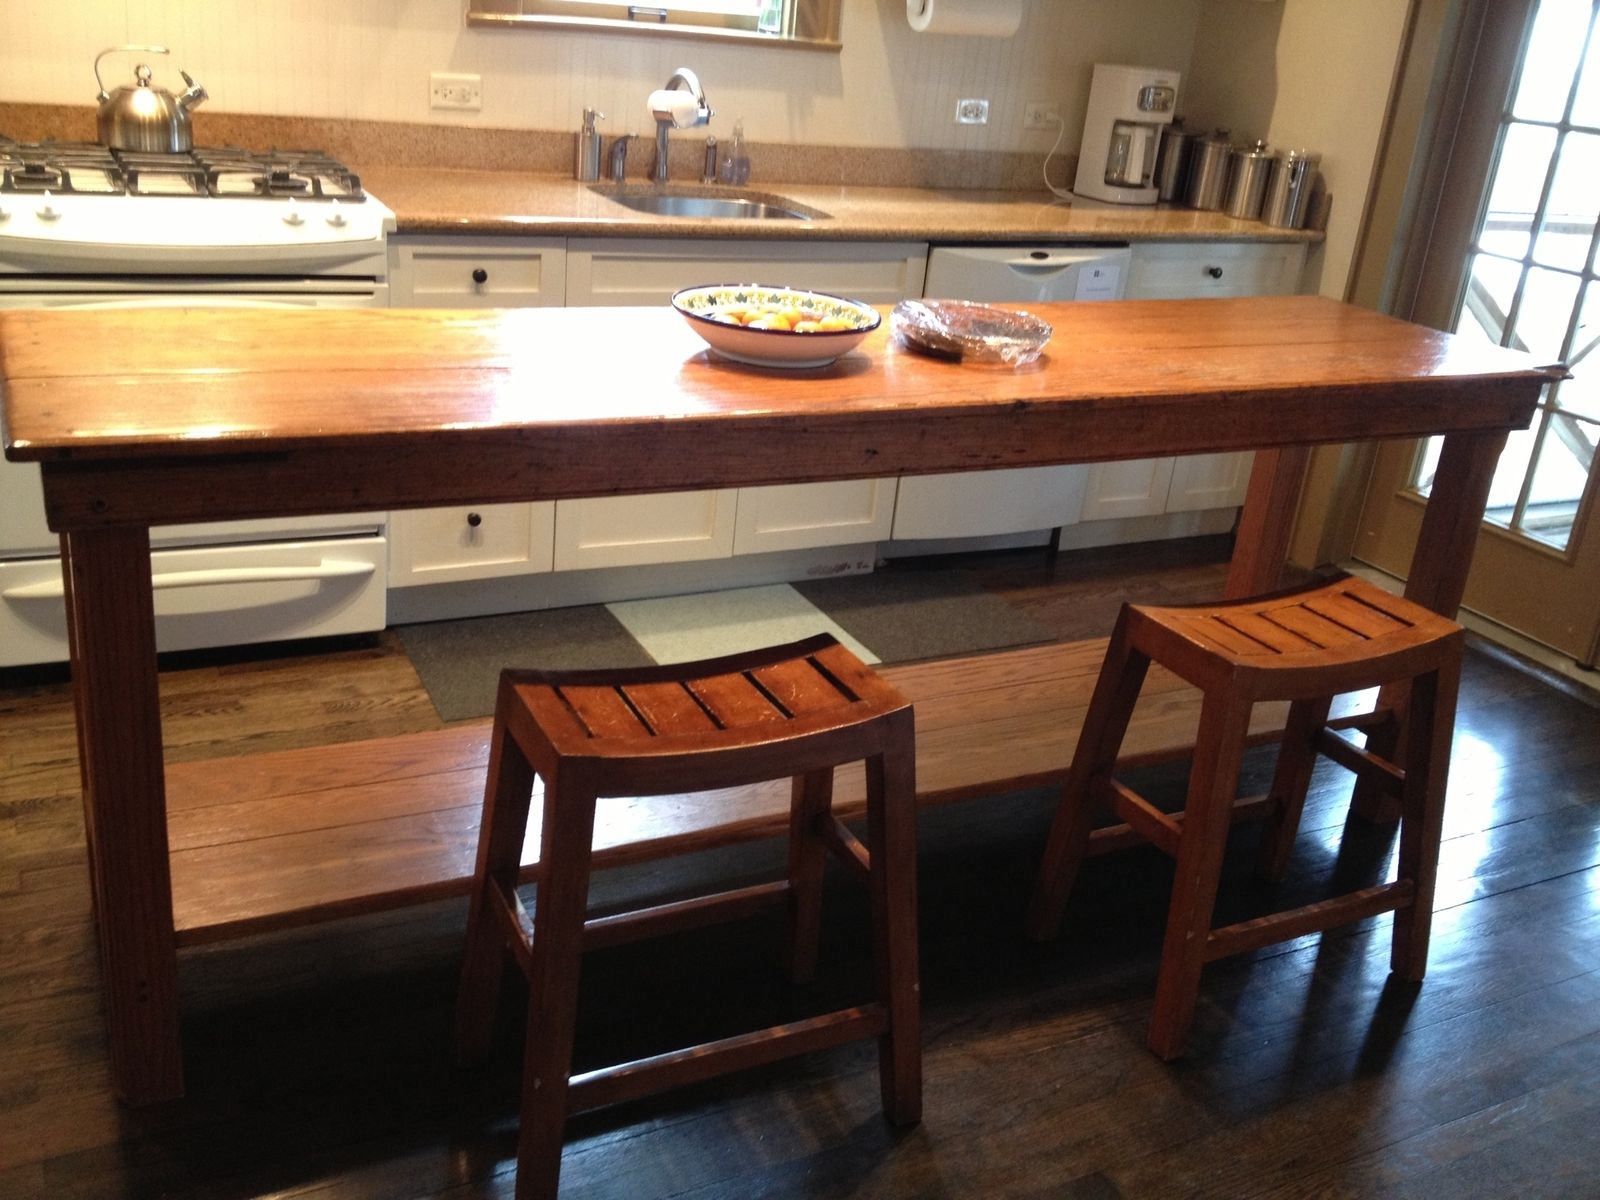 Handmade Rustic Kitchen Table by Fearons Fine Woodworking  CustomMade.com